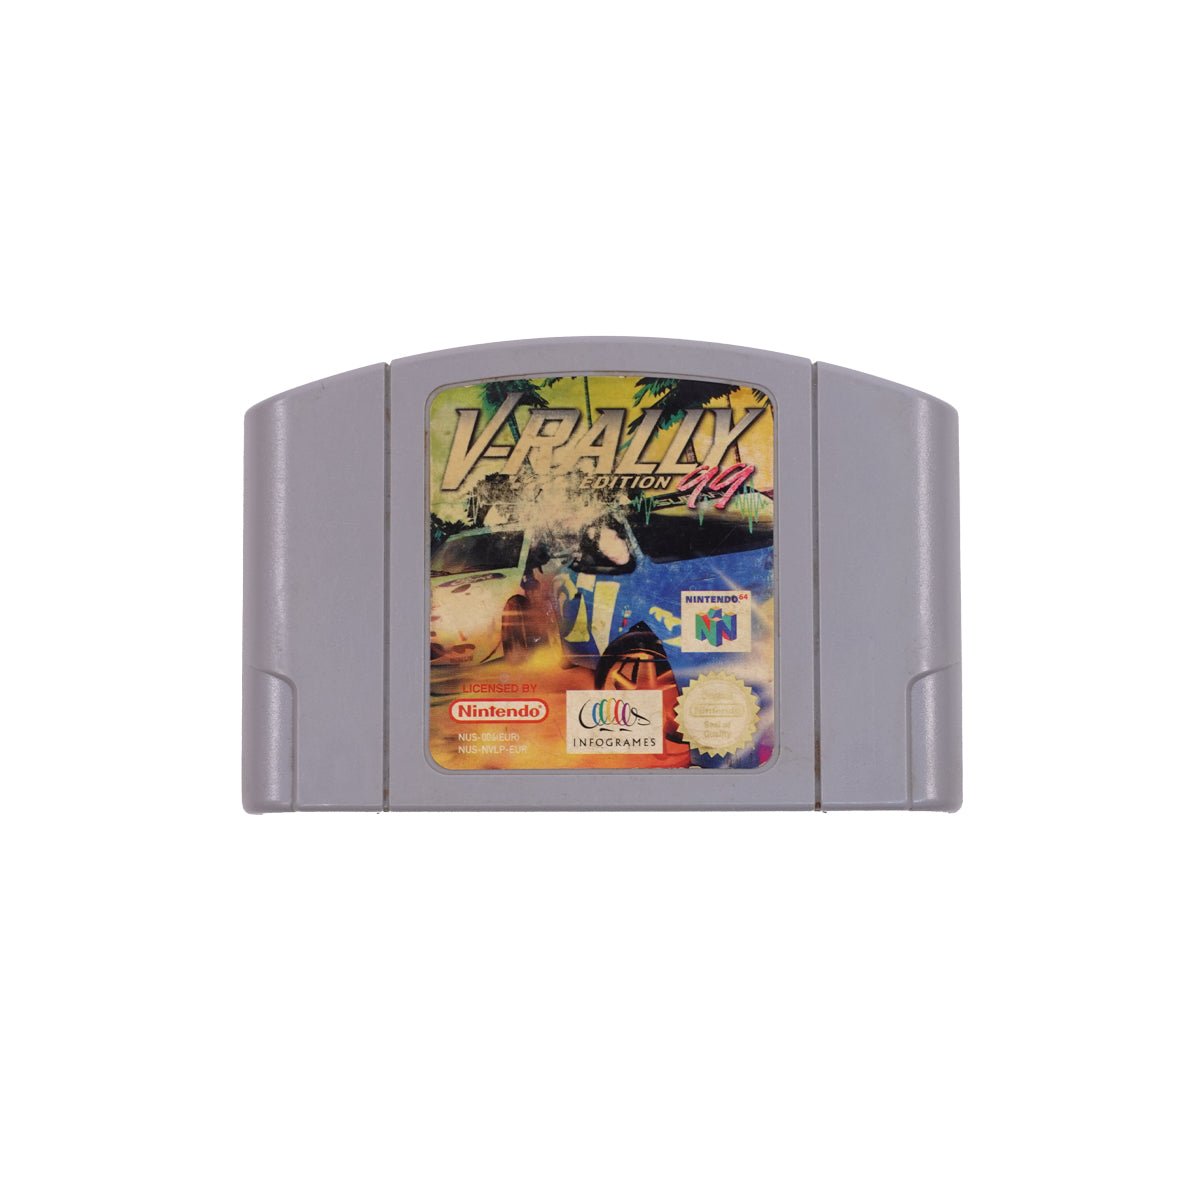 (Pre-Owned) V-Rally Edition 99 Video Game For Nintendo 64 - Store 974 | ستور ٩٧٤